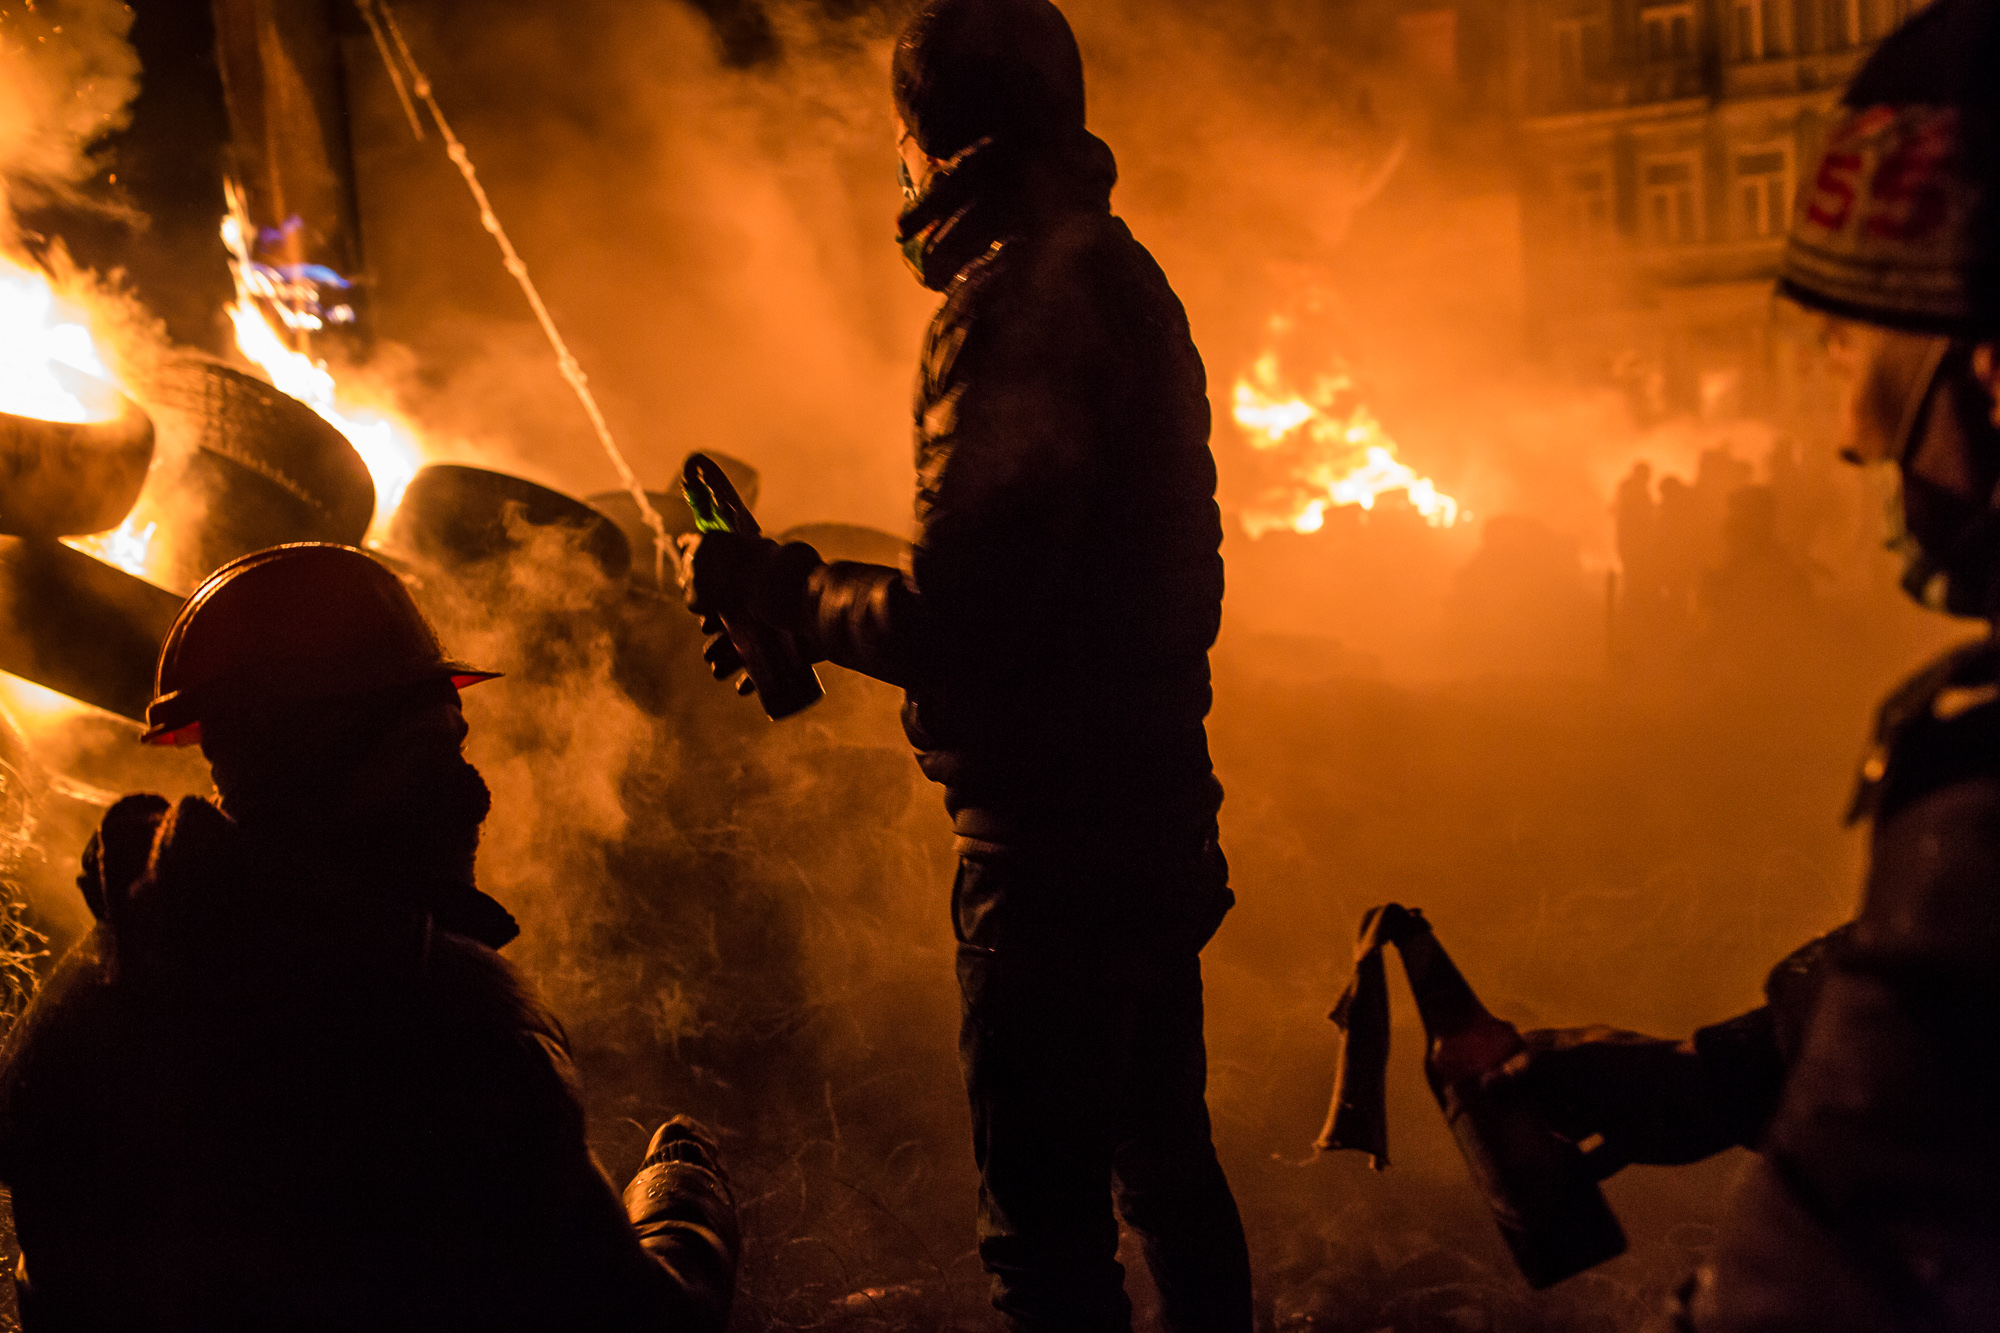  Anti-government protesters prepare to throw Molotov cocktails during clashes with police on Hrushevskoho Street near Dynamo stadium on January 25, 2014 in Kiev, Ukraine. After two months of primarily peaceful anti-government protests in the city cen